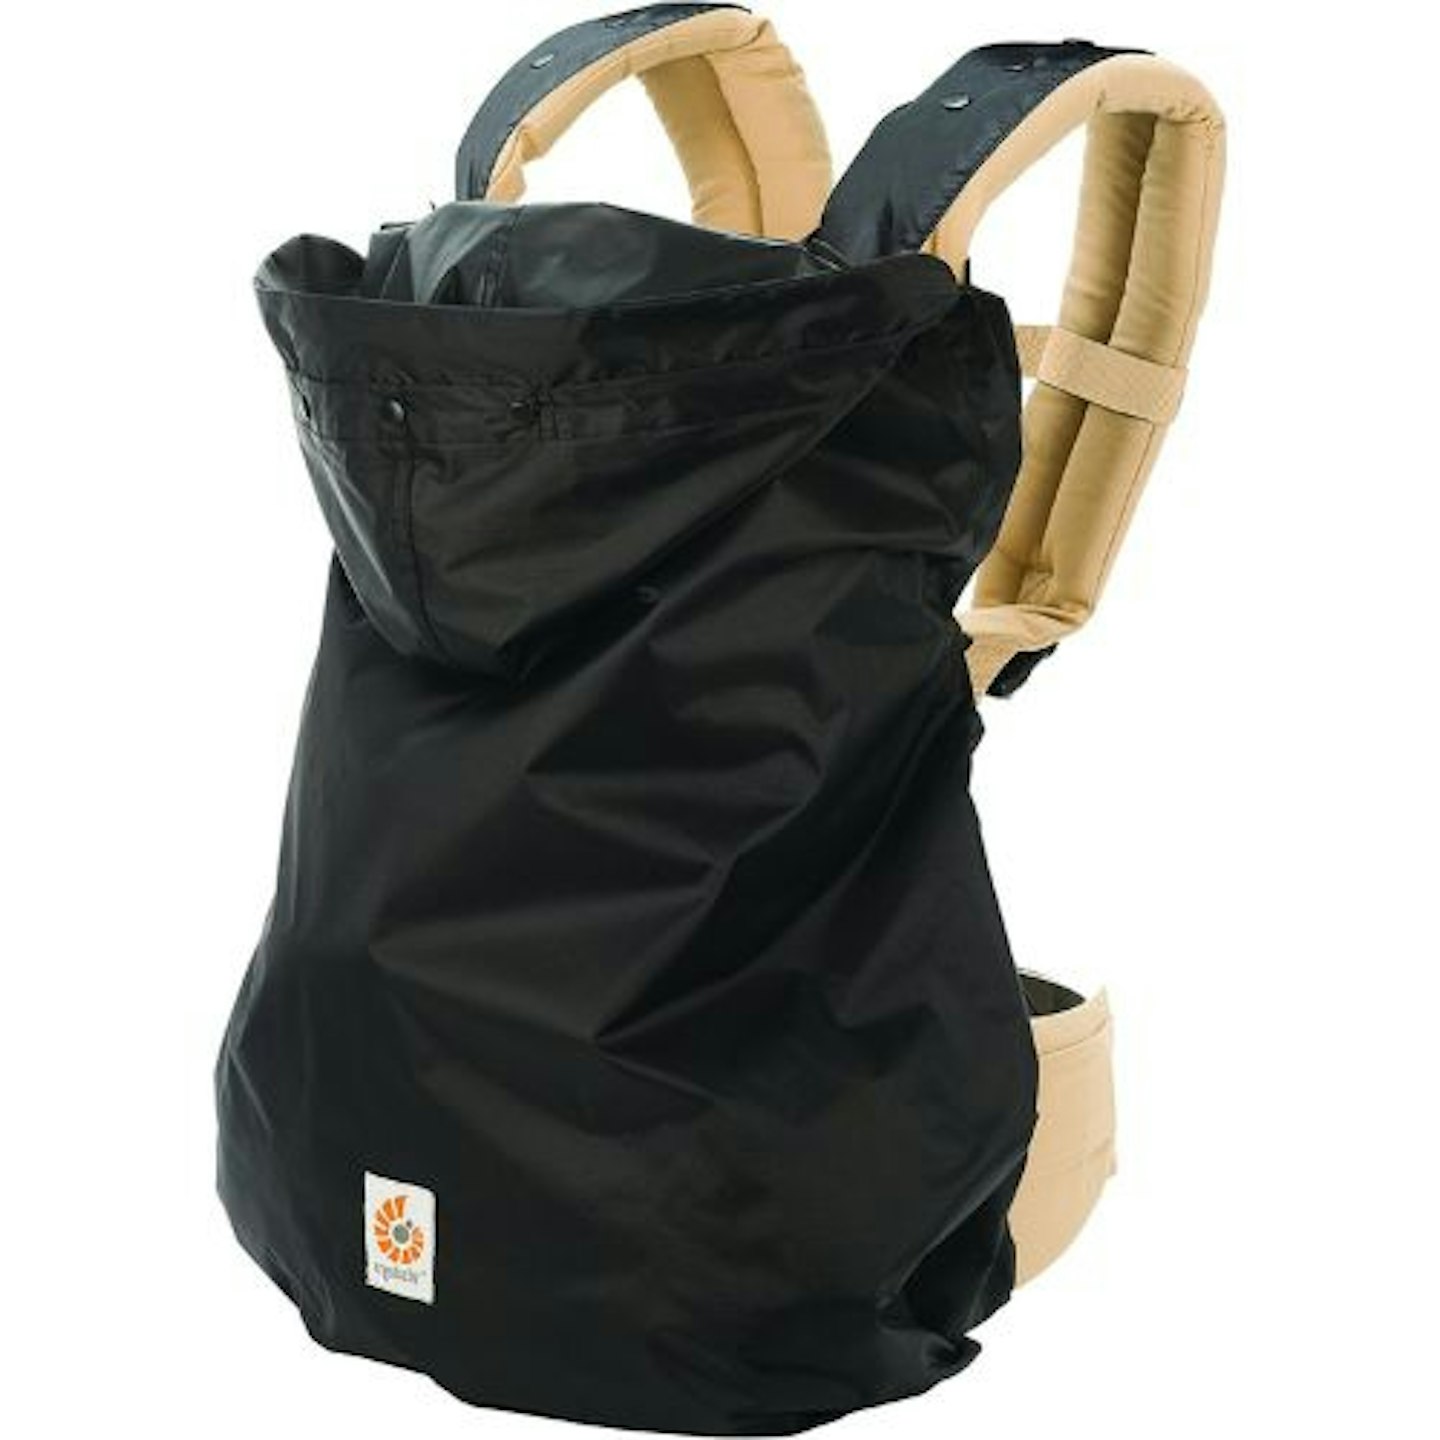 Best baby carrier covers Ergobaby Rain Cover